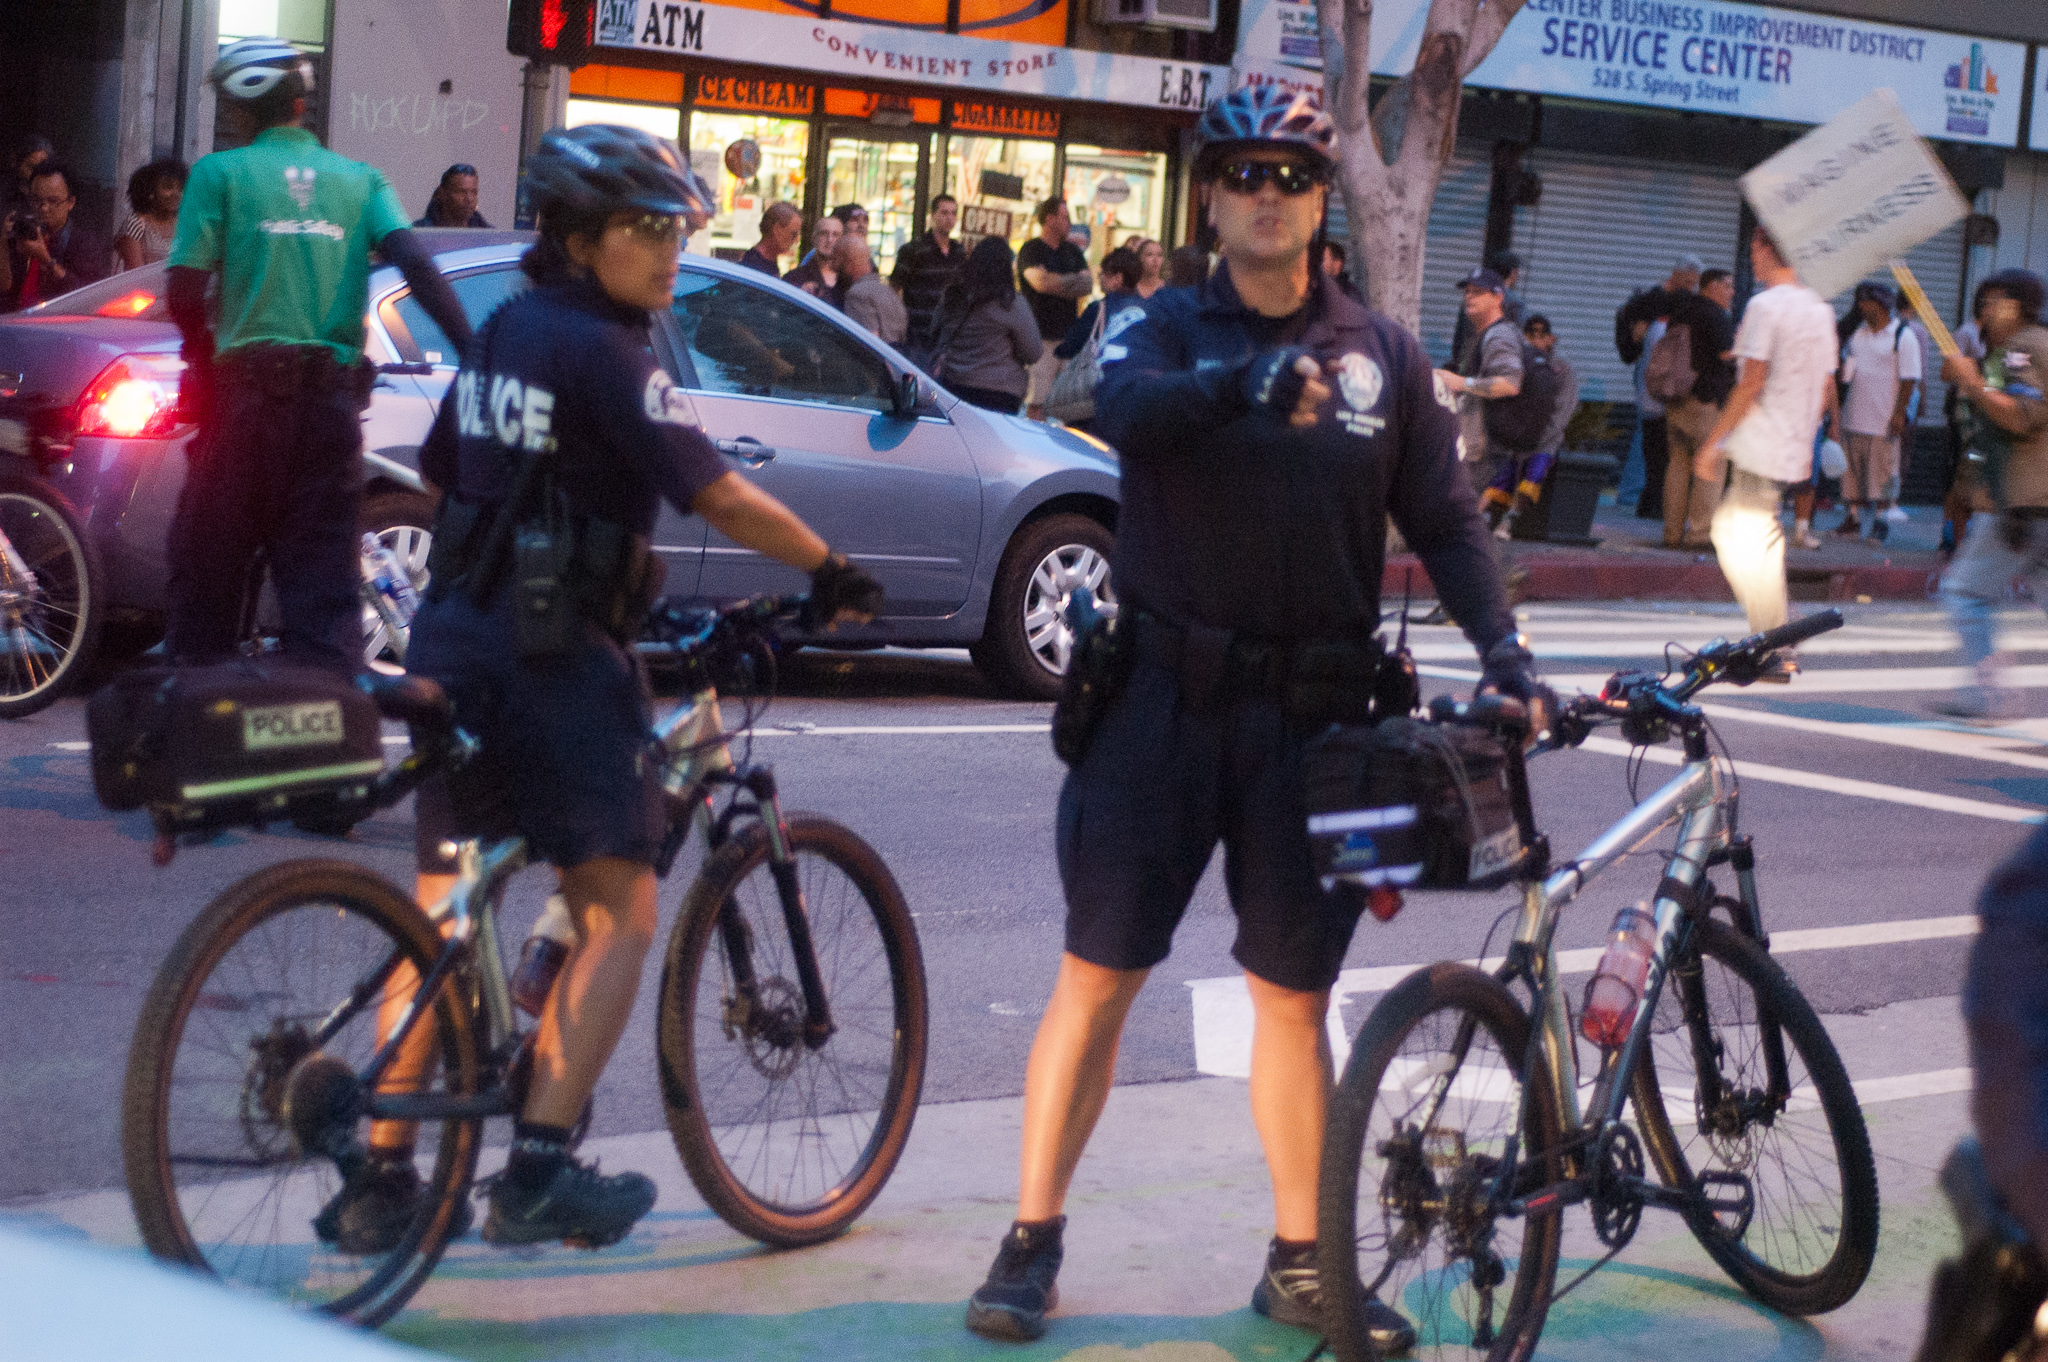 Two Lapd Bike Cops With A Security Guard In The Background